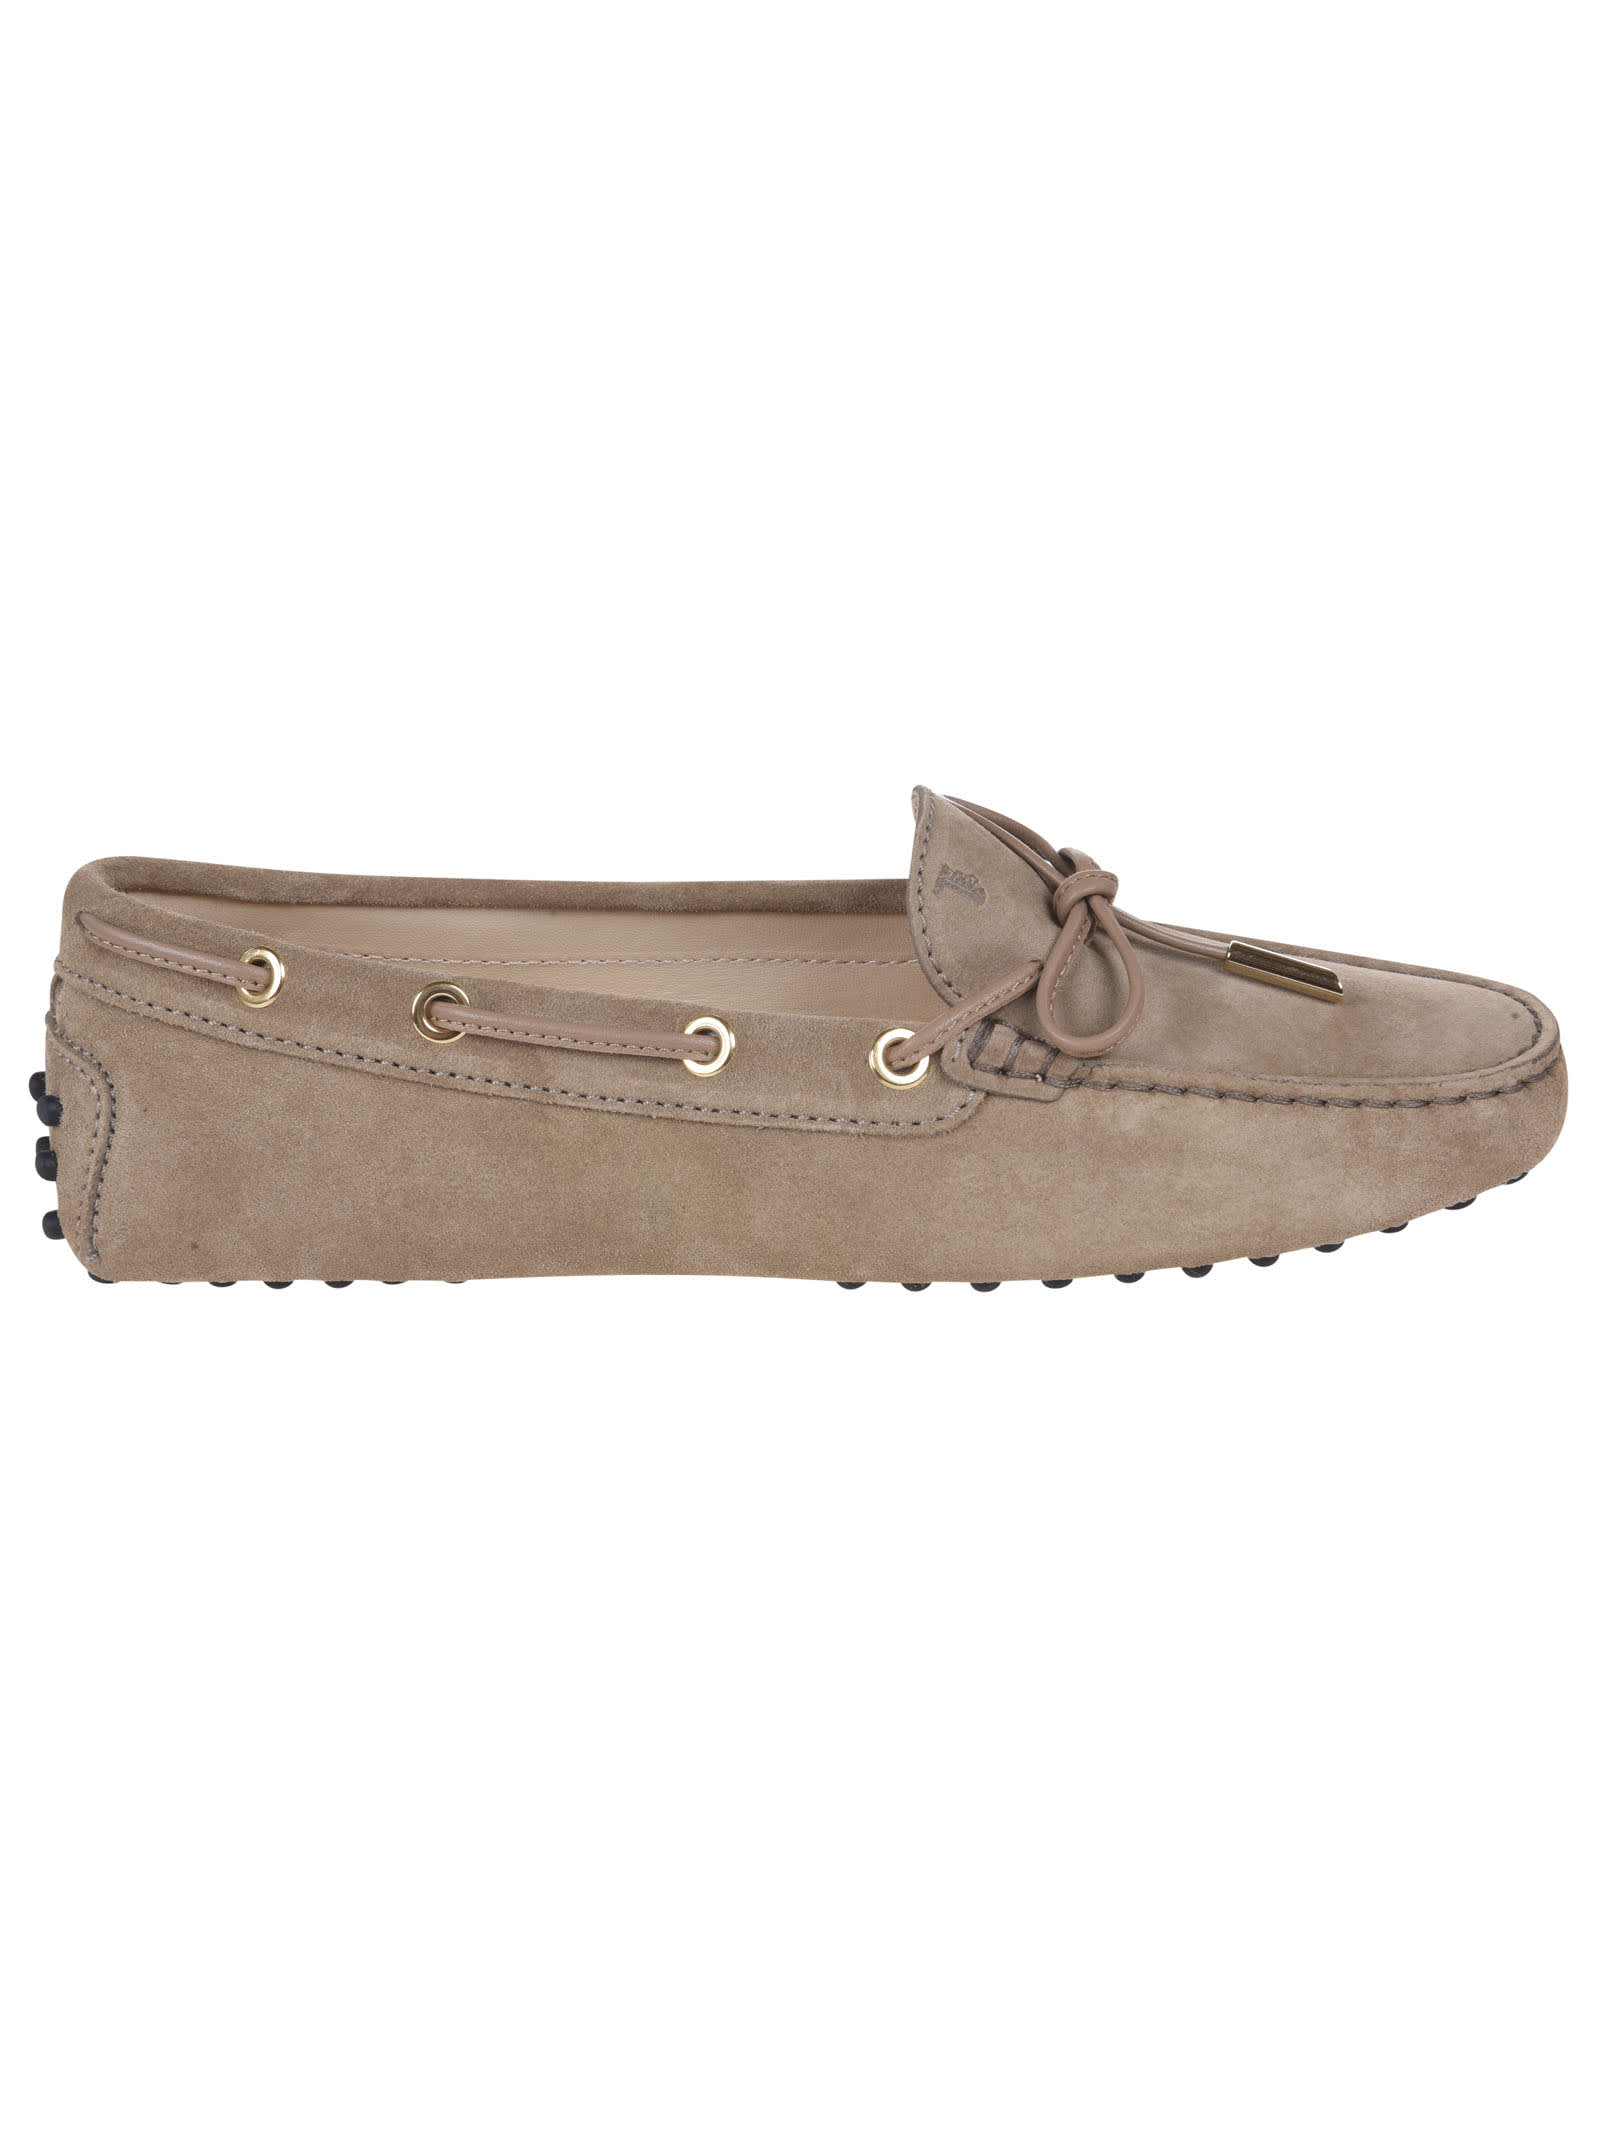 Buy Tods Heaven Loafers online, shop Tods shoes with free shipping